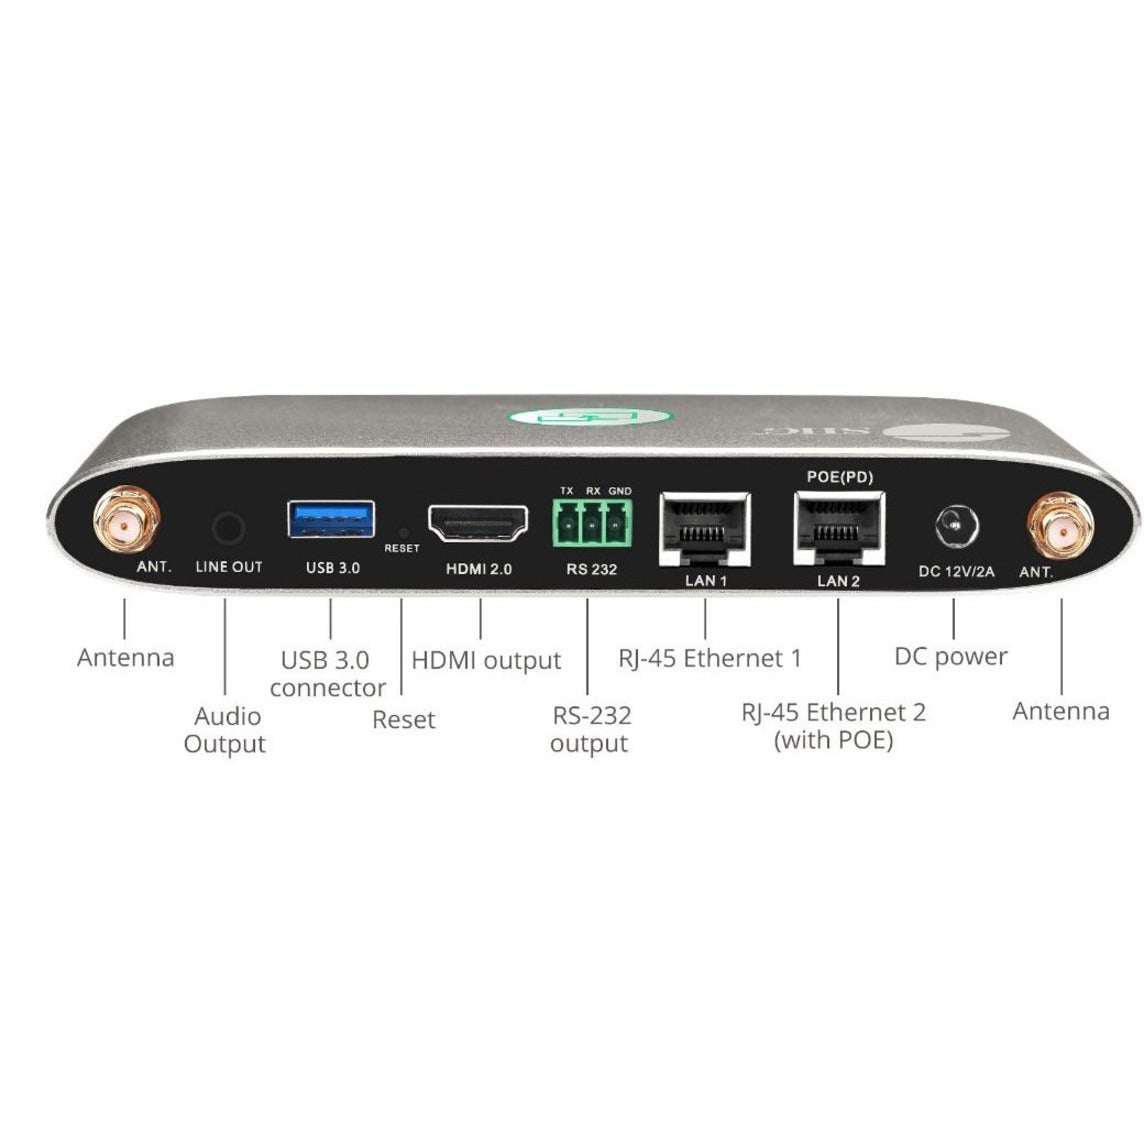 SIIG CE-H25Y11-S1 Dual View Wireless Media Presentation Switch Gateway, 4K UHD, 16 Connections